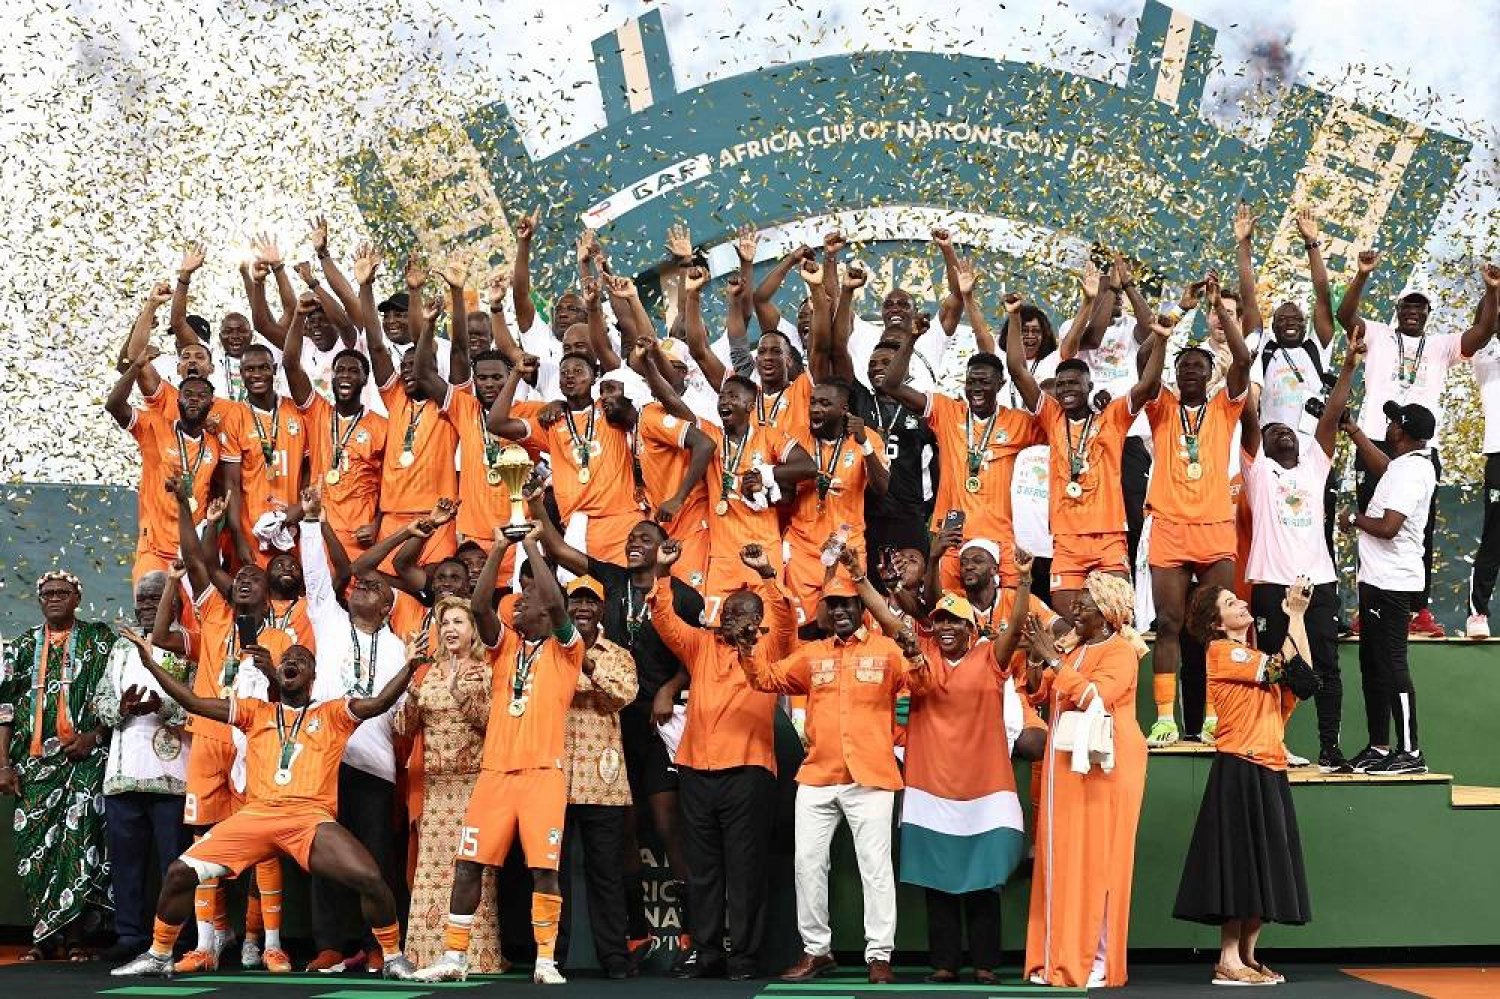 Party Begins as Ivory Coast Rallies to Beat Nigeria 2-1 and Win Africa Cup  of Nations